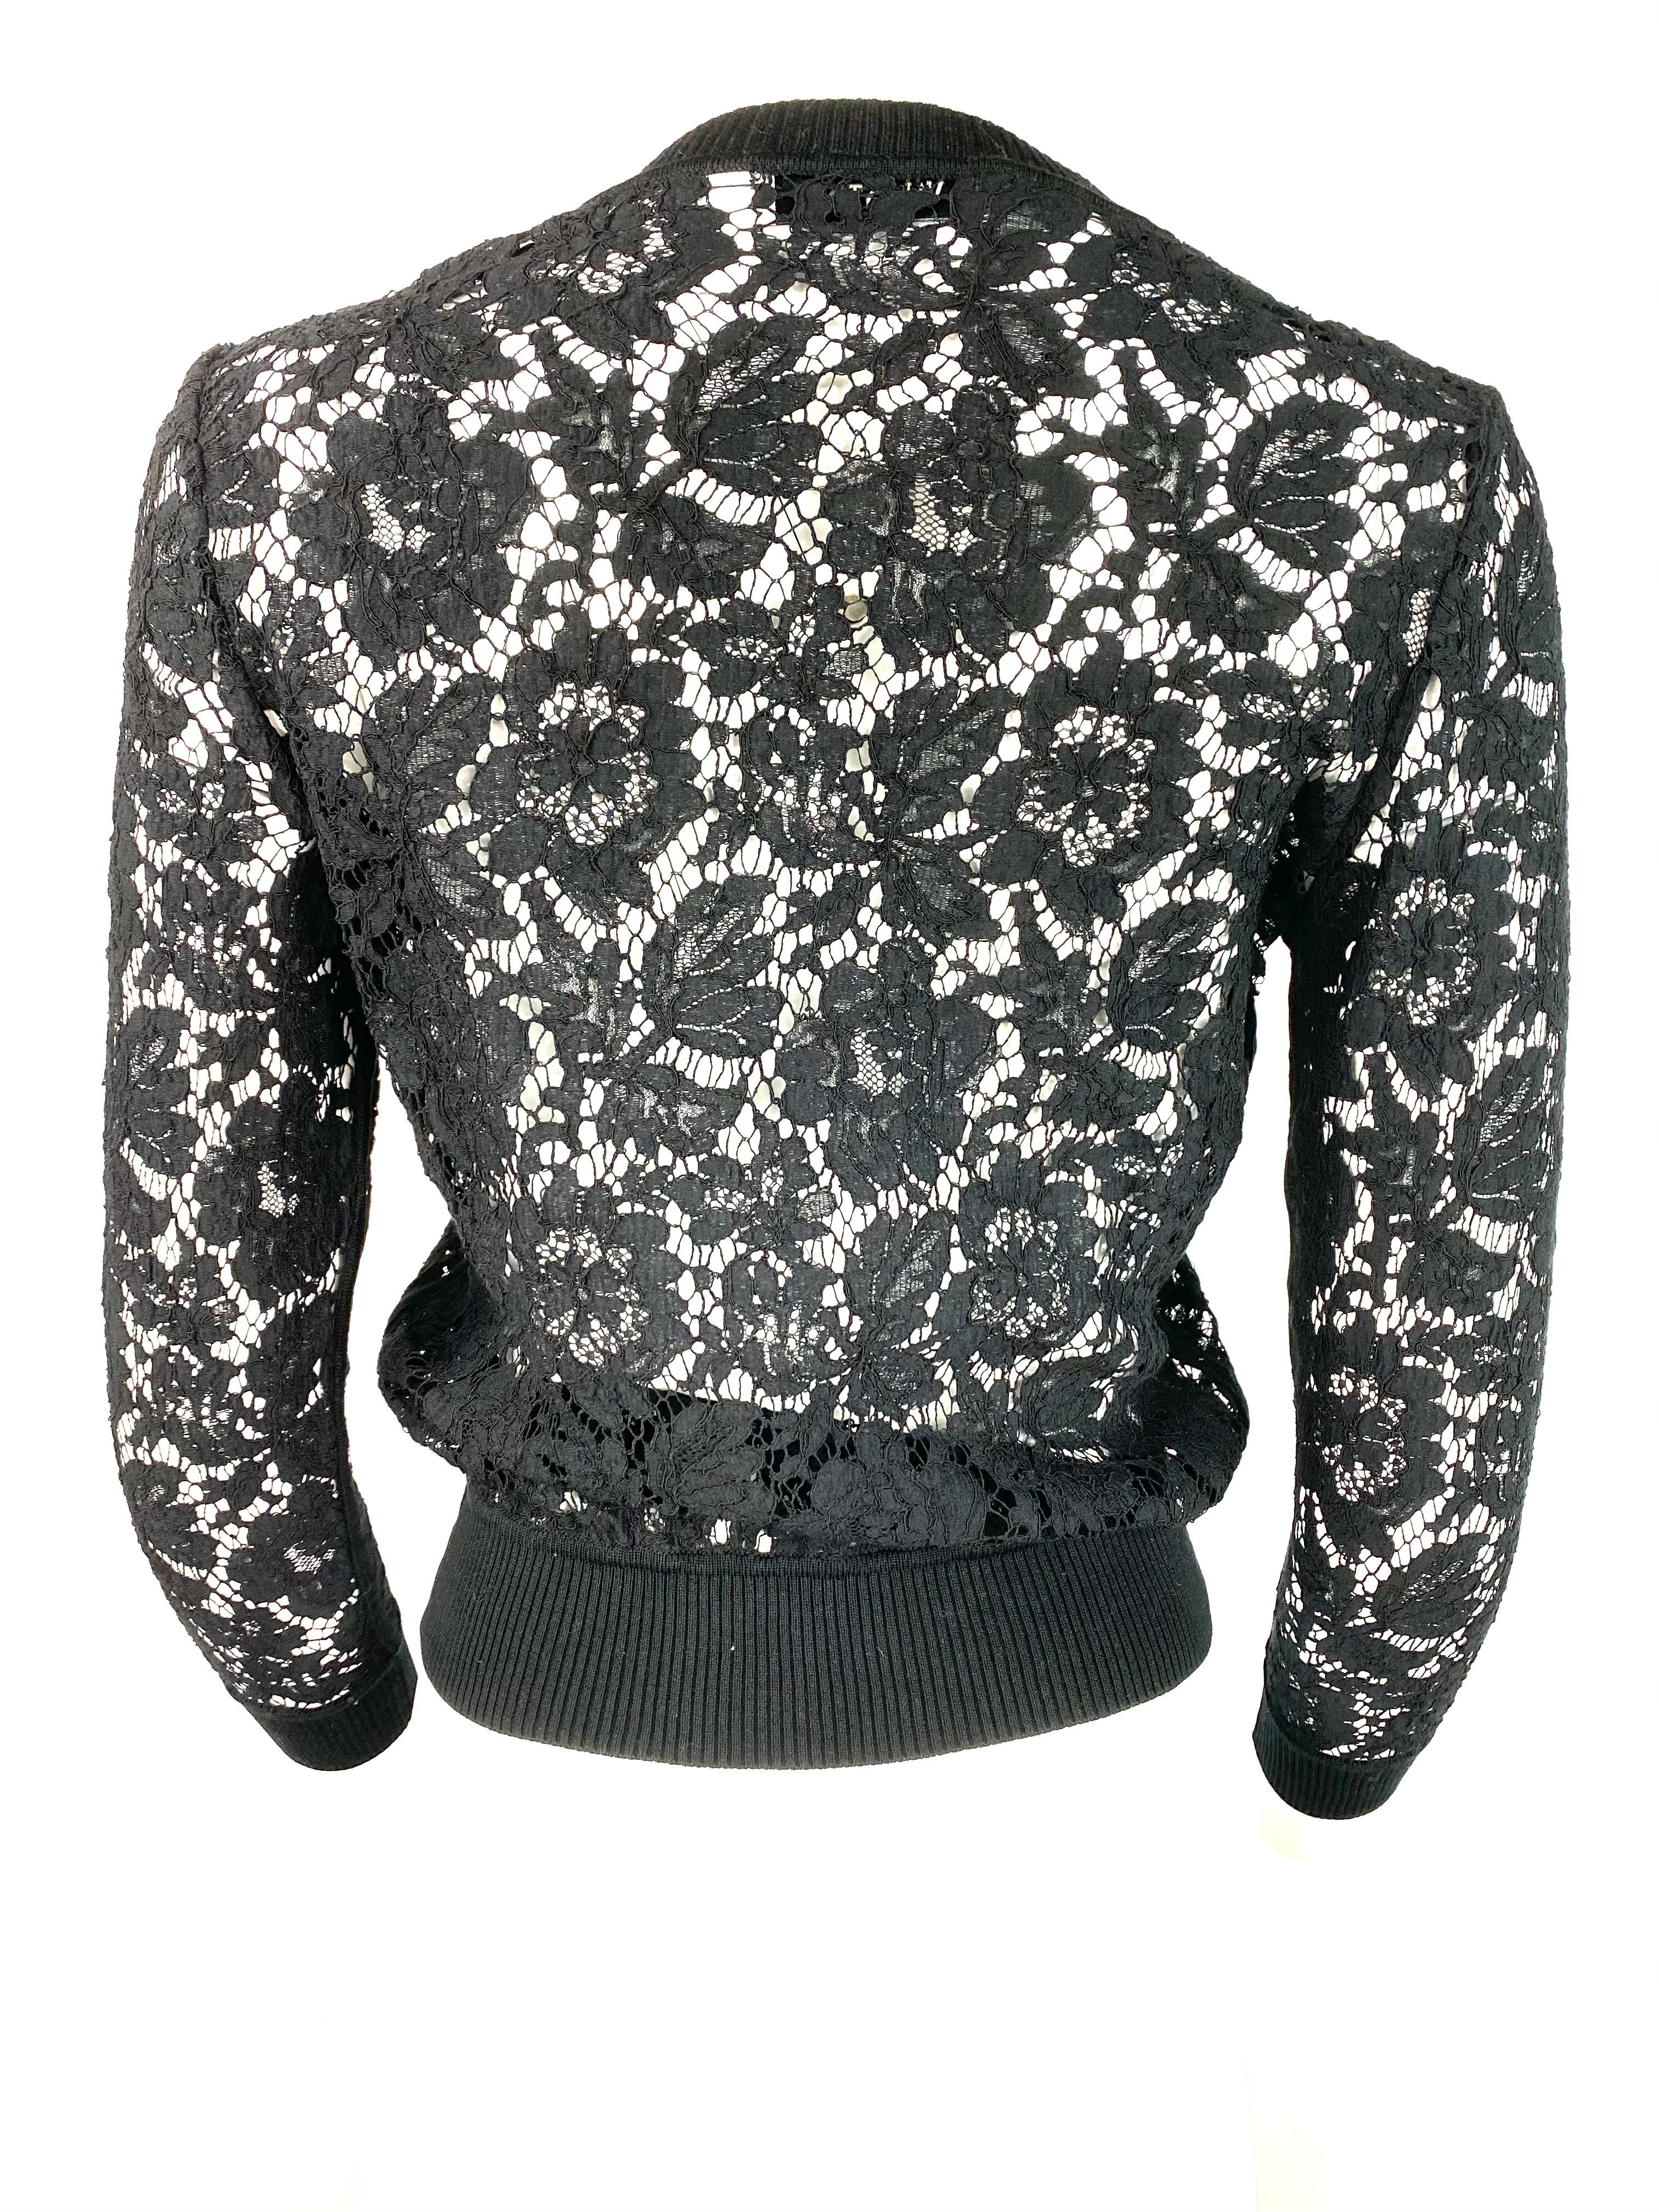 Valentino Black Lace Cardigan Top  In Excellent Condition For Sale In Beverly Hills, CA